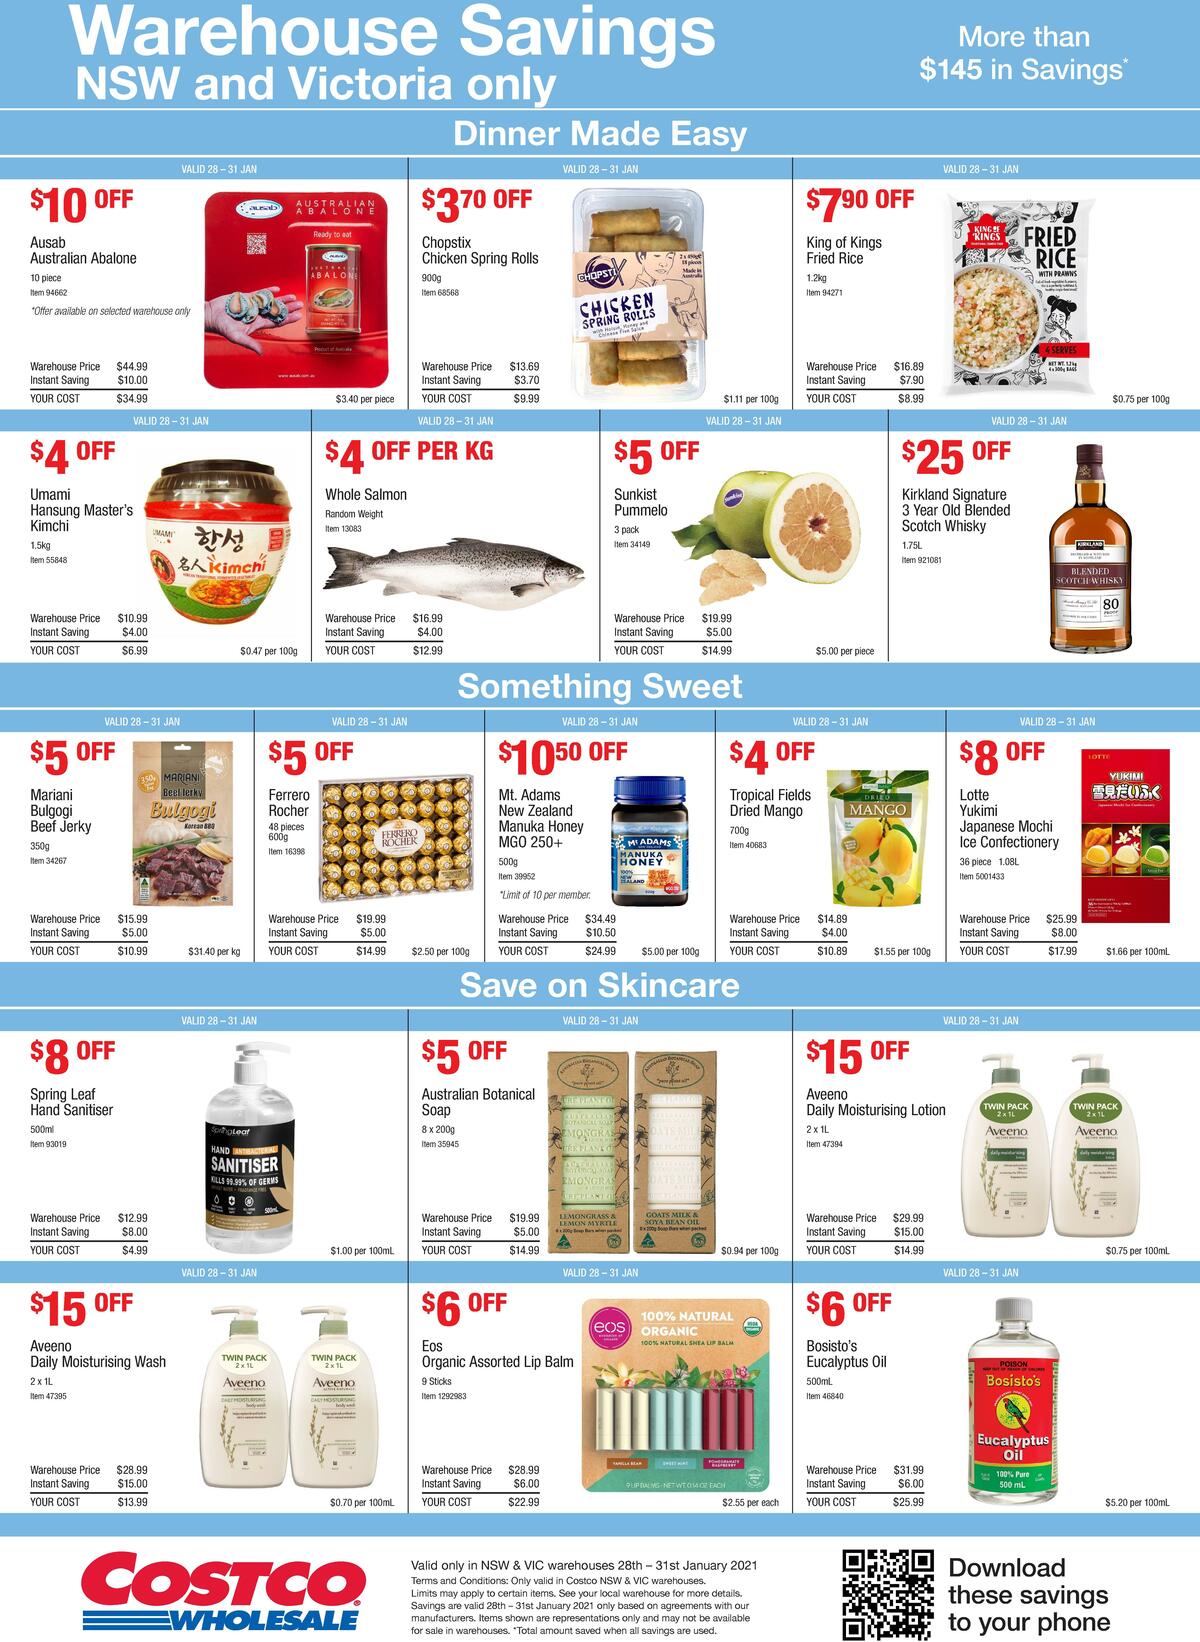 Costco Warehouse Savings NSW & VIC Only Catalogues & Specials from 28